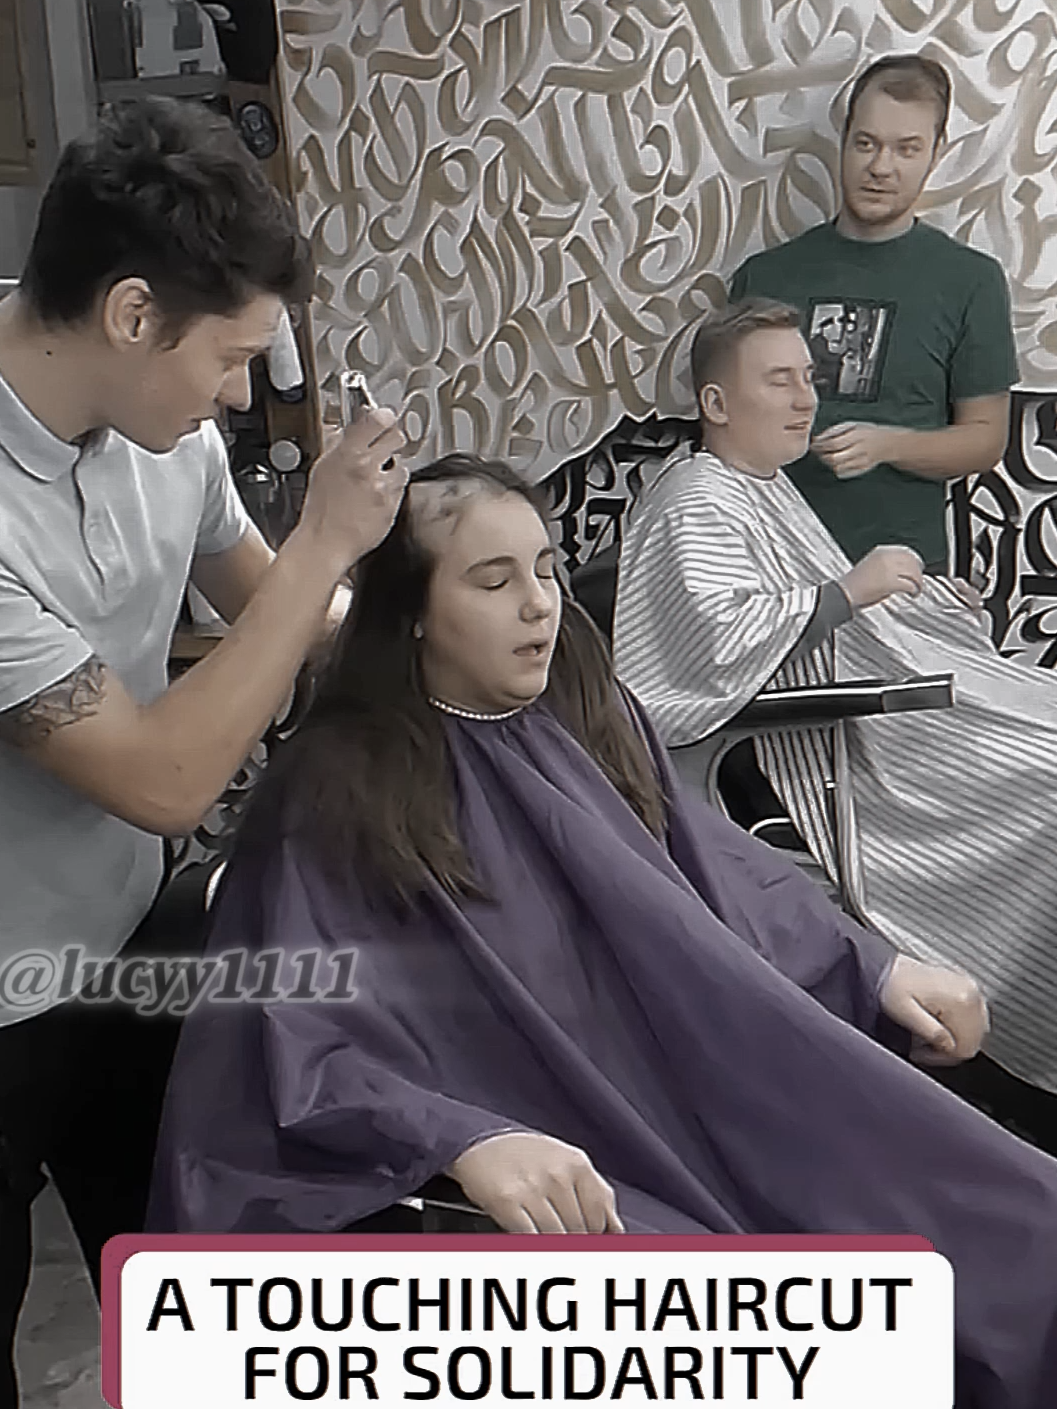 Solidarity shave symbolizes strength and support #kindness  #socialexperiment  #viralvideo  #respect